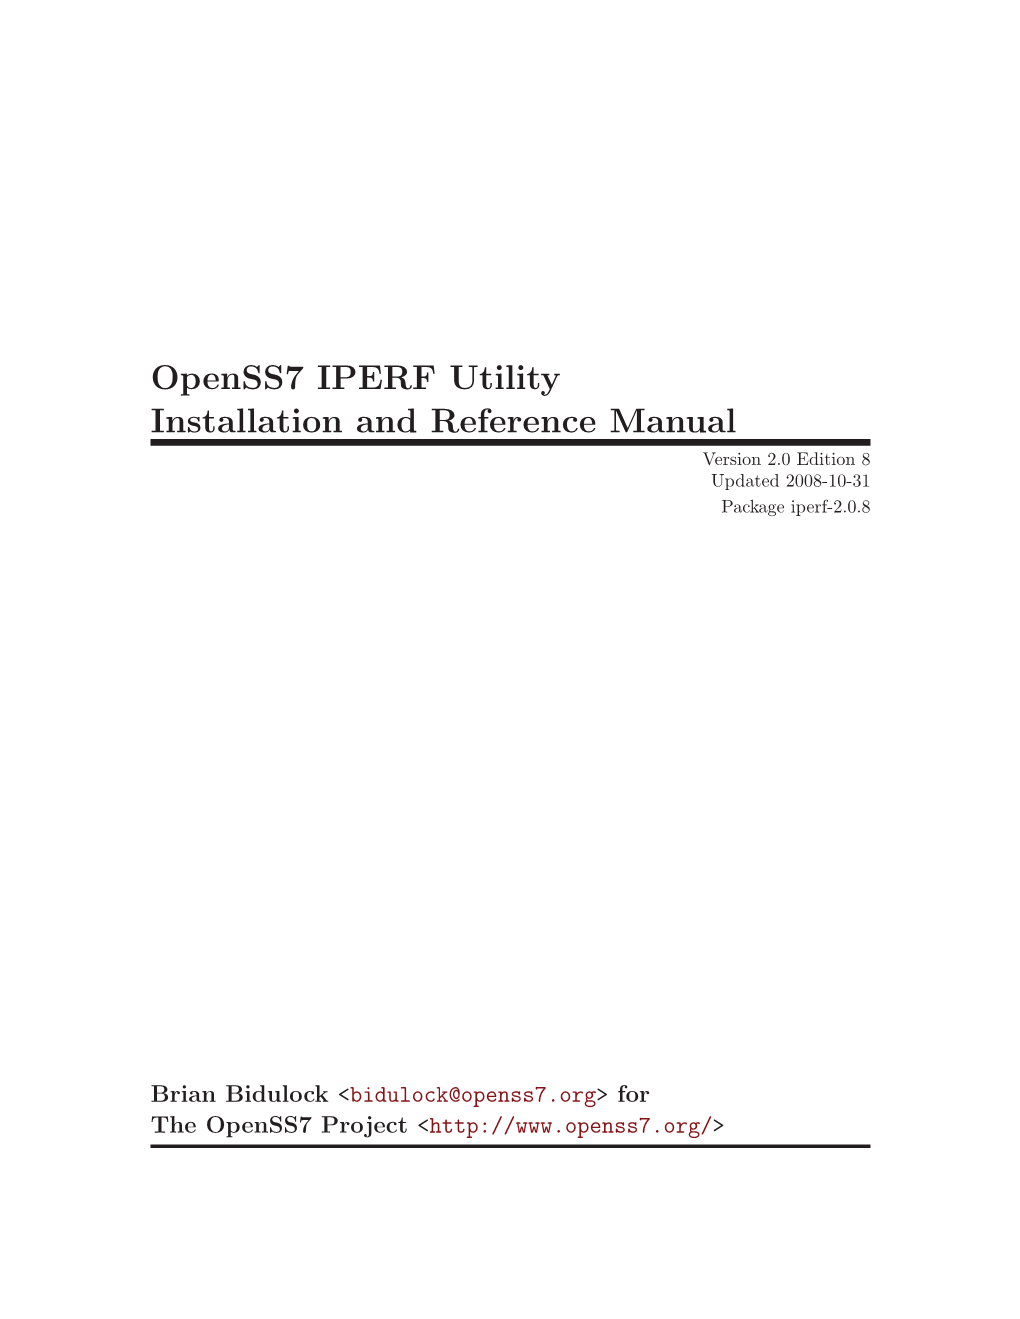 Openss7 IPERF Utility Installation and Reference Manual Version 2.0 Edition 8 Updated 2008-10-31 Package Iperf-2.0.8